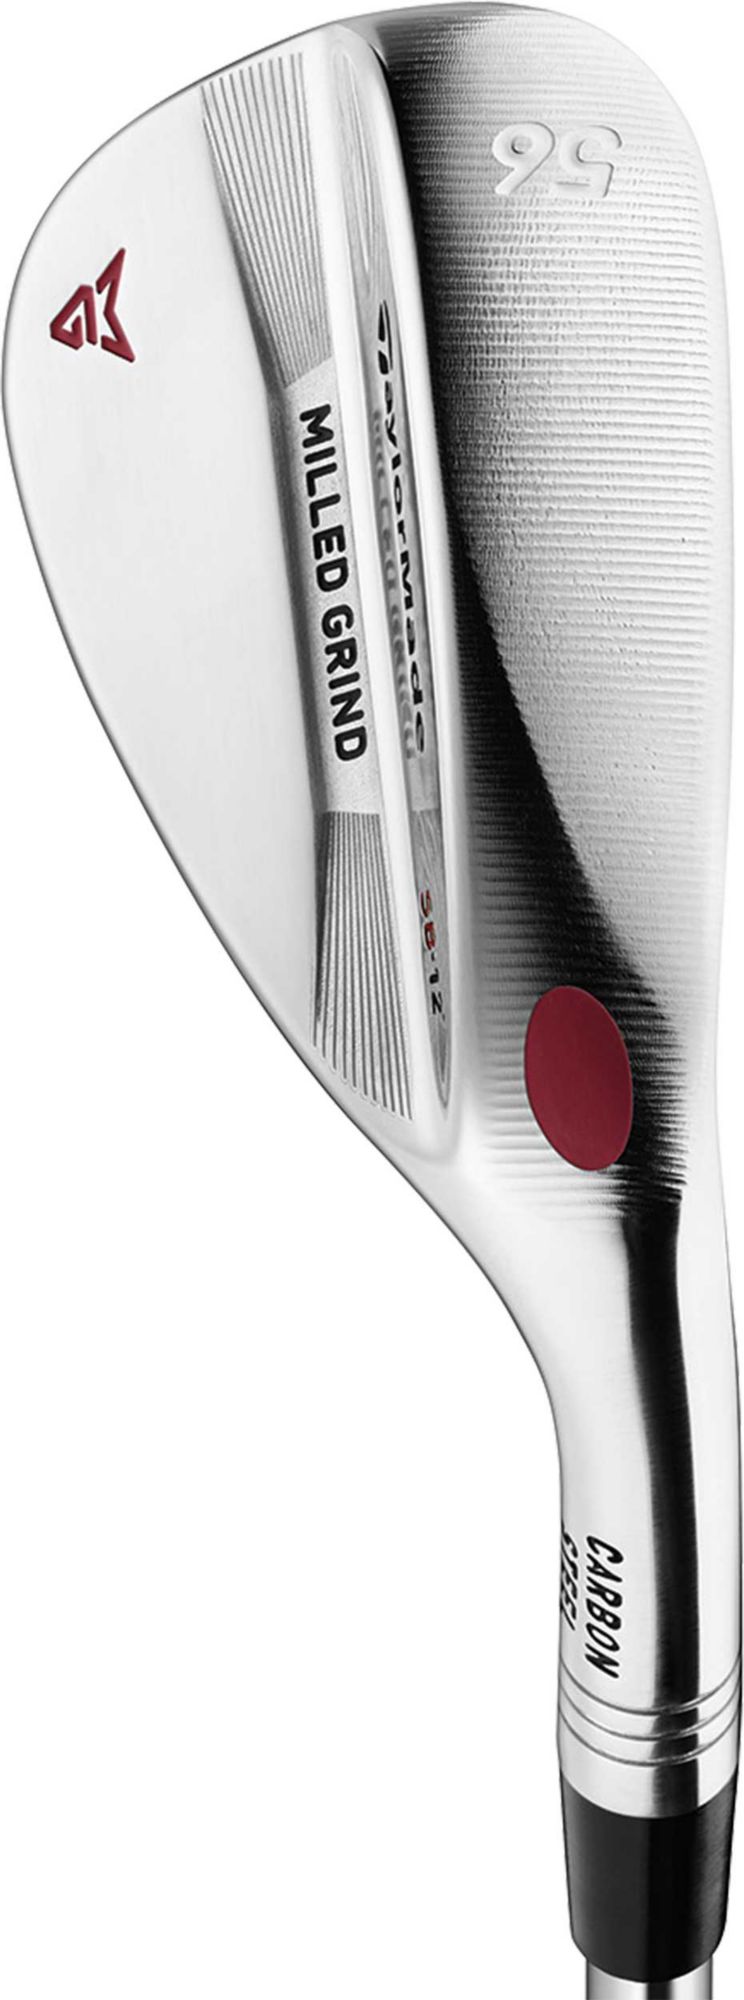 TaylorMade Milled Grind Chrome Wedge